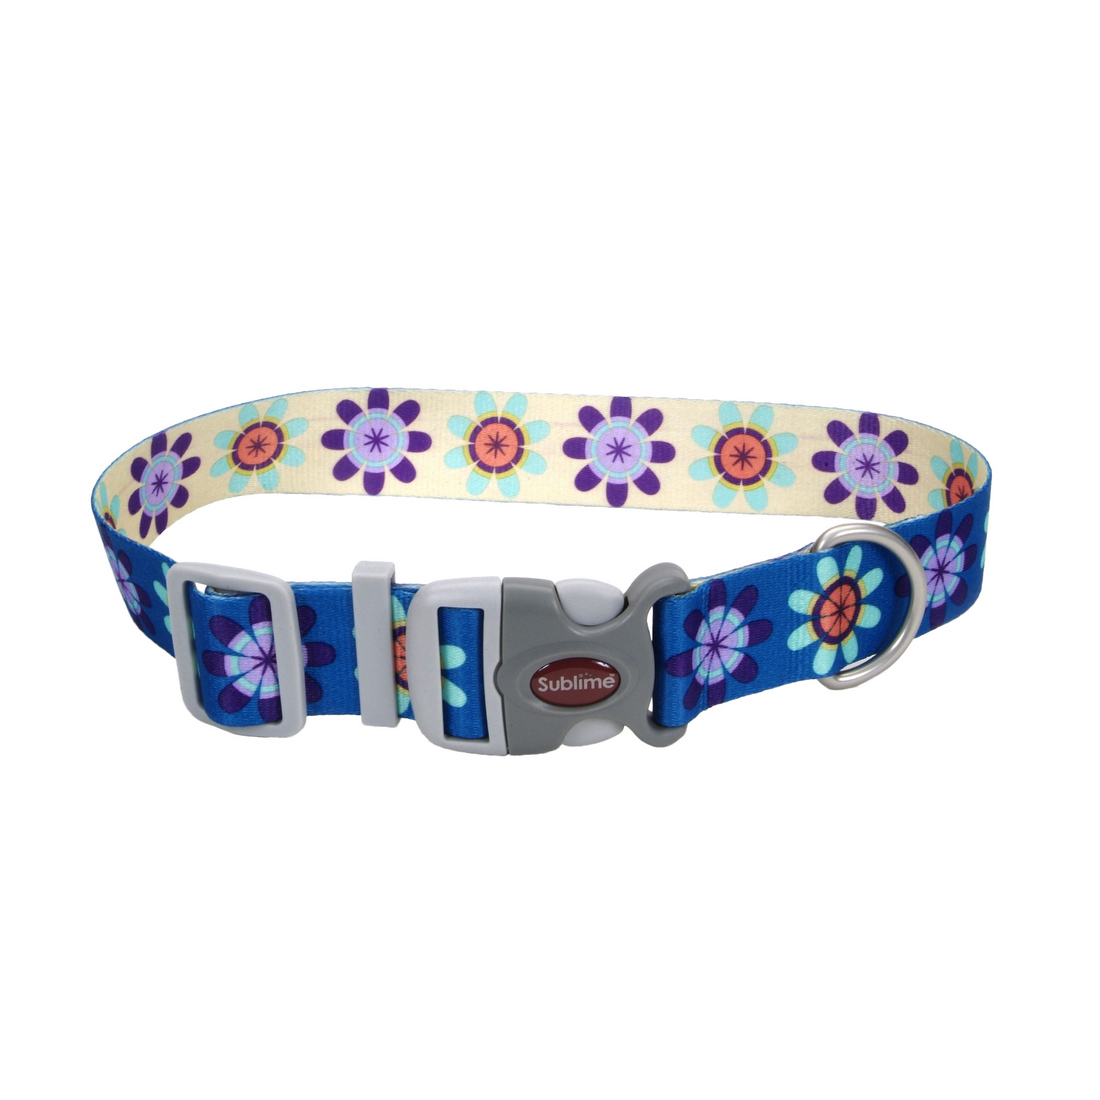 Coastal 1.5 and Sublime Dog Collar Flower Purple and Yellow Large